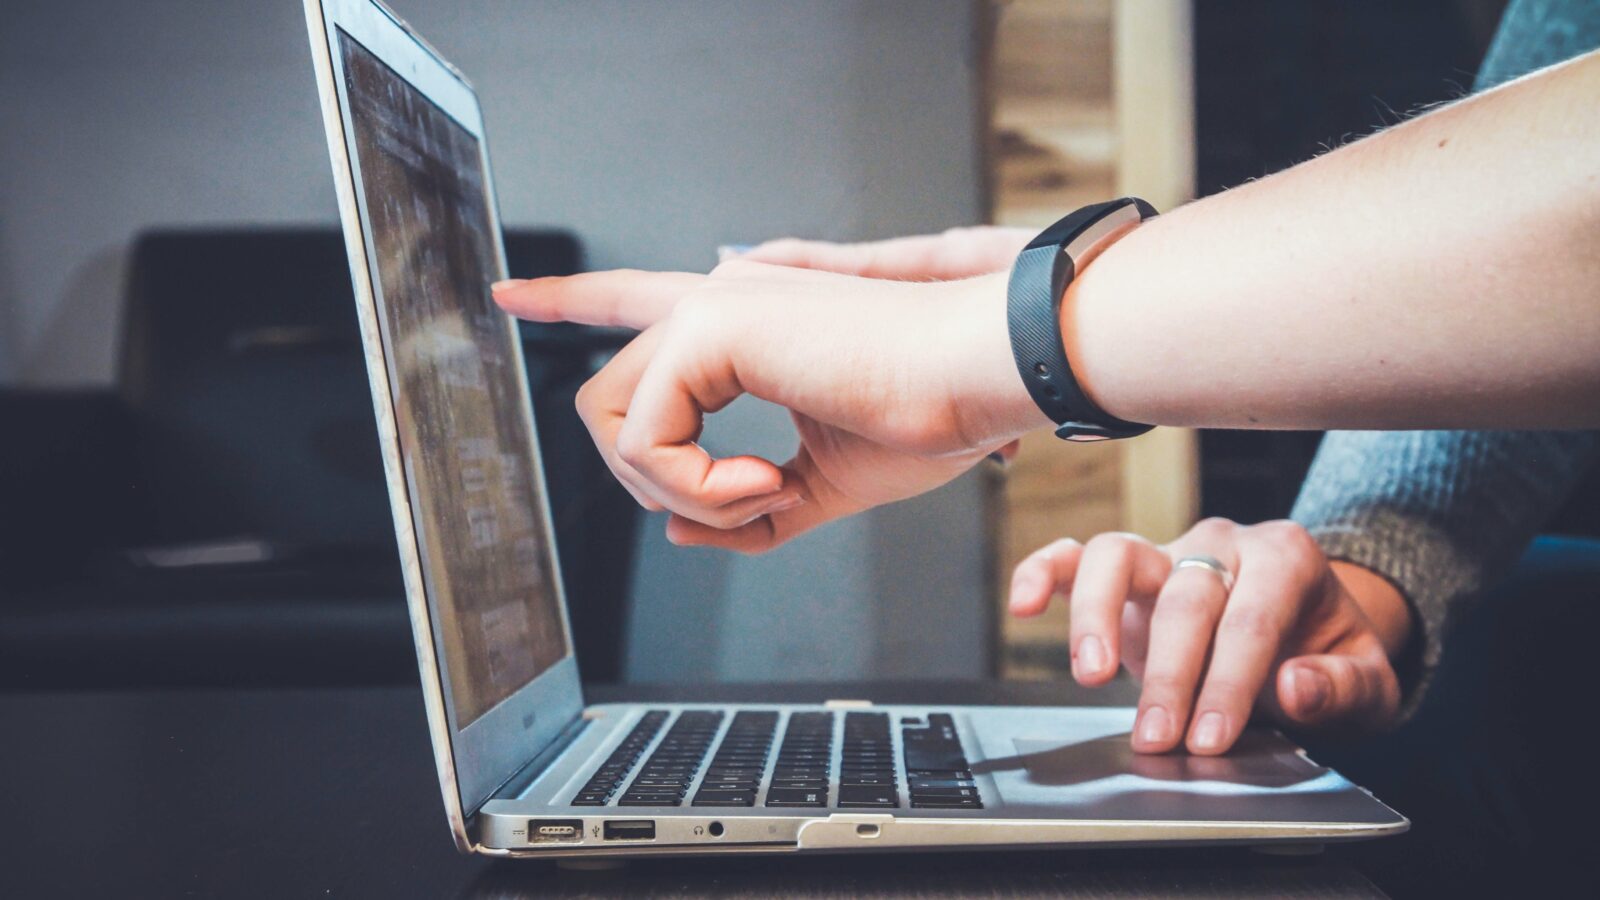 A solid nonprofit change management strategy will help your staff members quickly adopt new technologies. In this image, a person's arm points out something on the screen of another person's MacBook laptop.